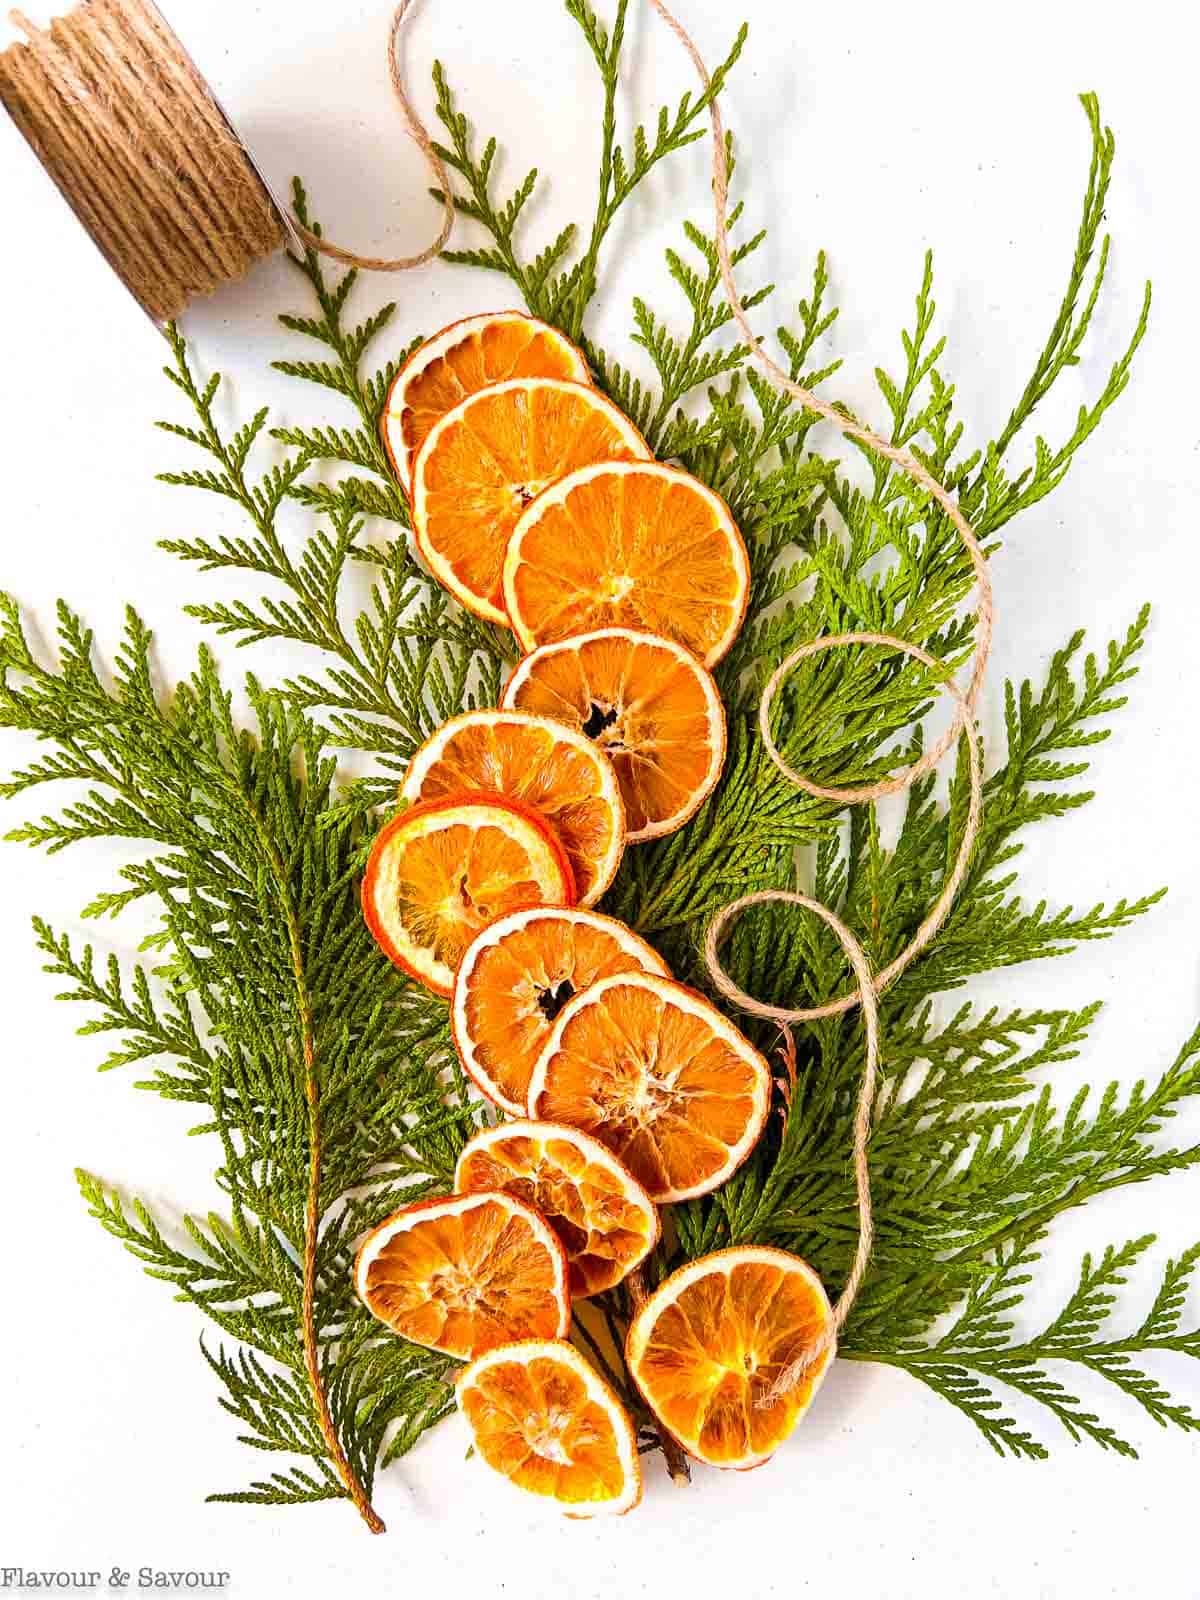 Dried orange slices on cedar boughs with twine.